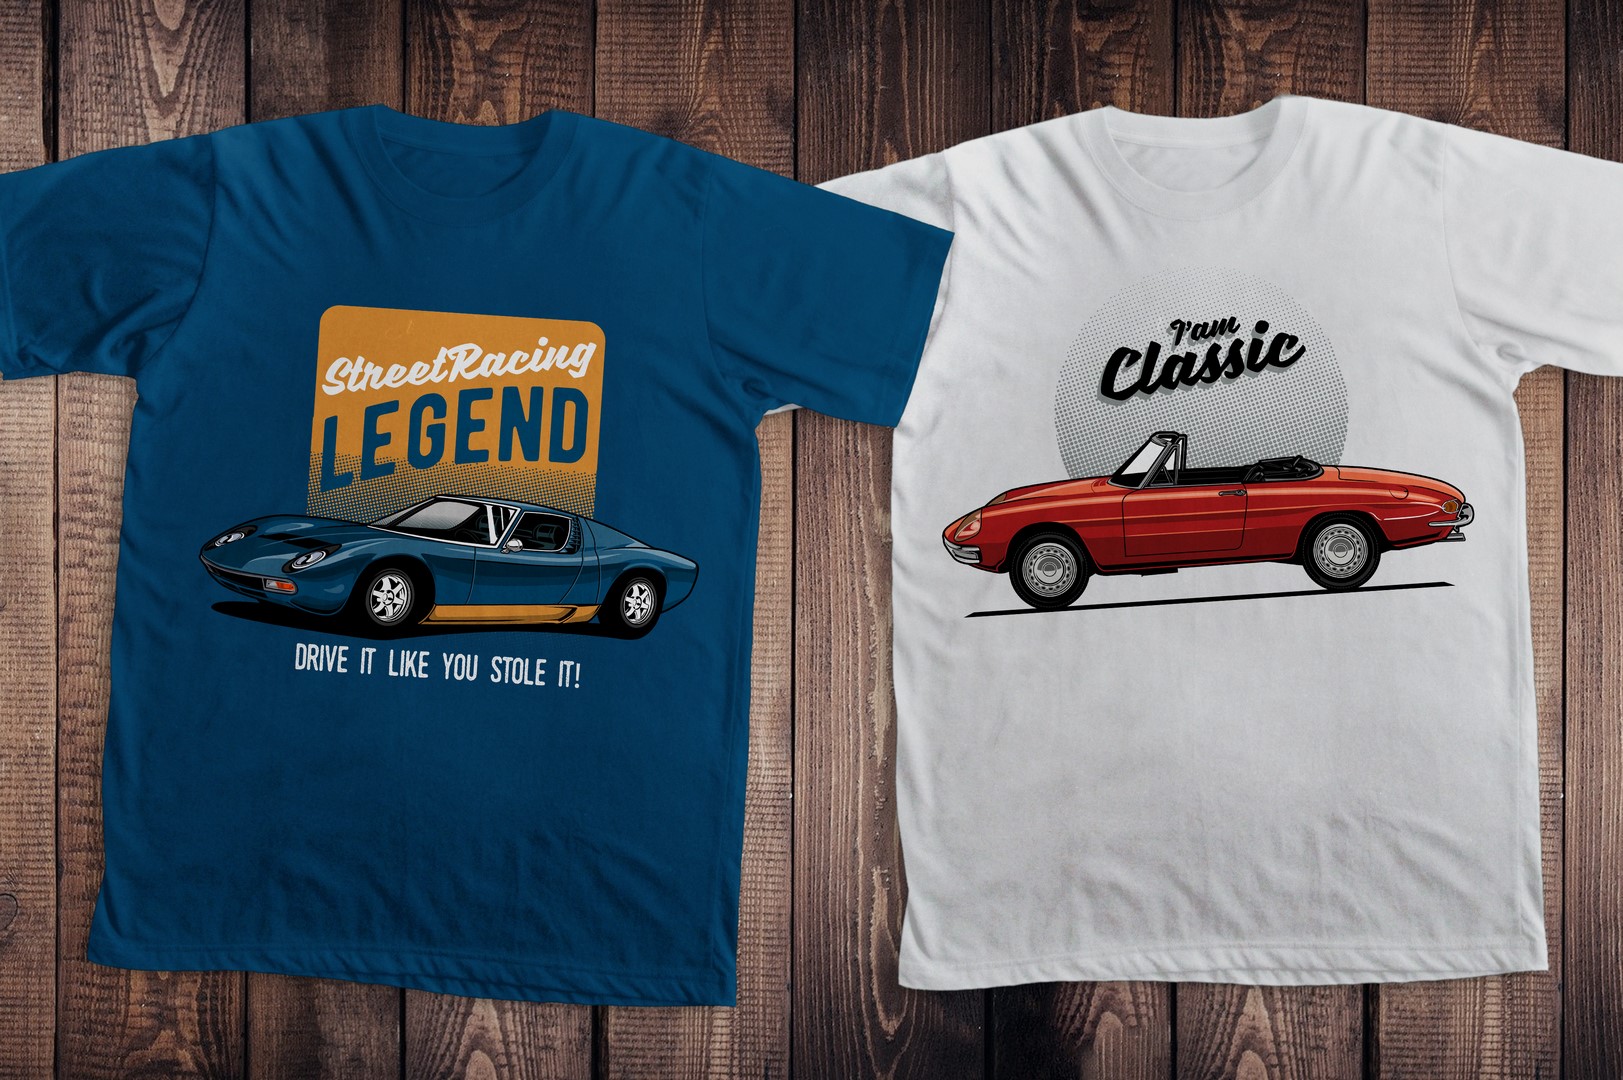 classic-car-vector-collection-volume-4